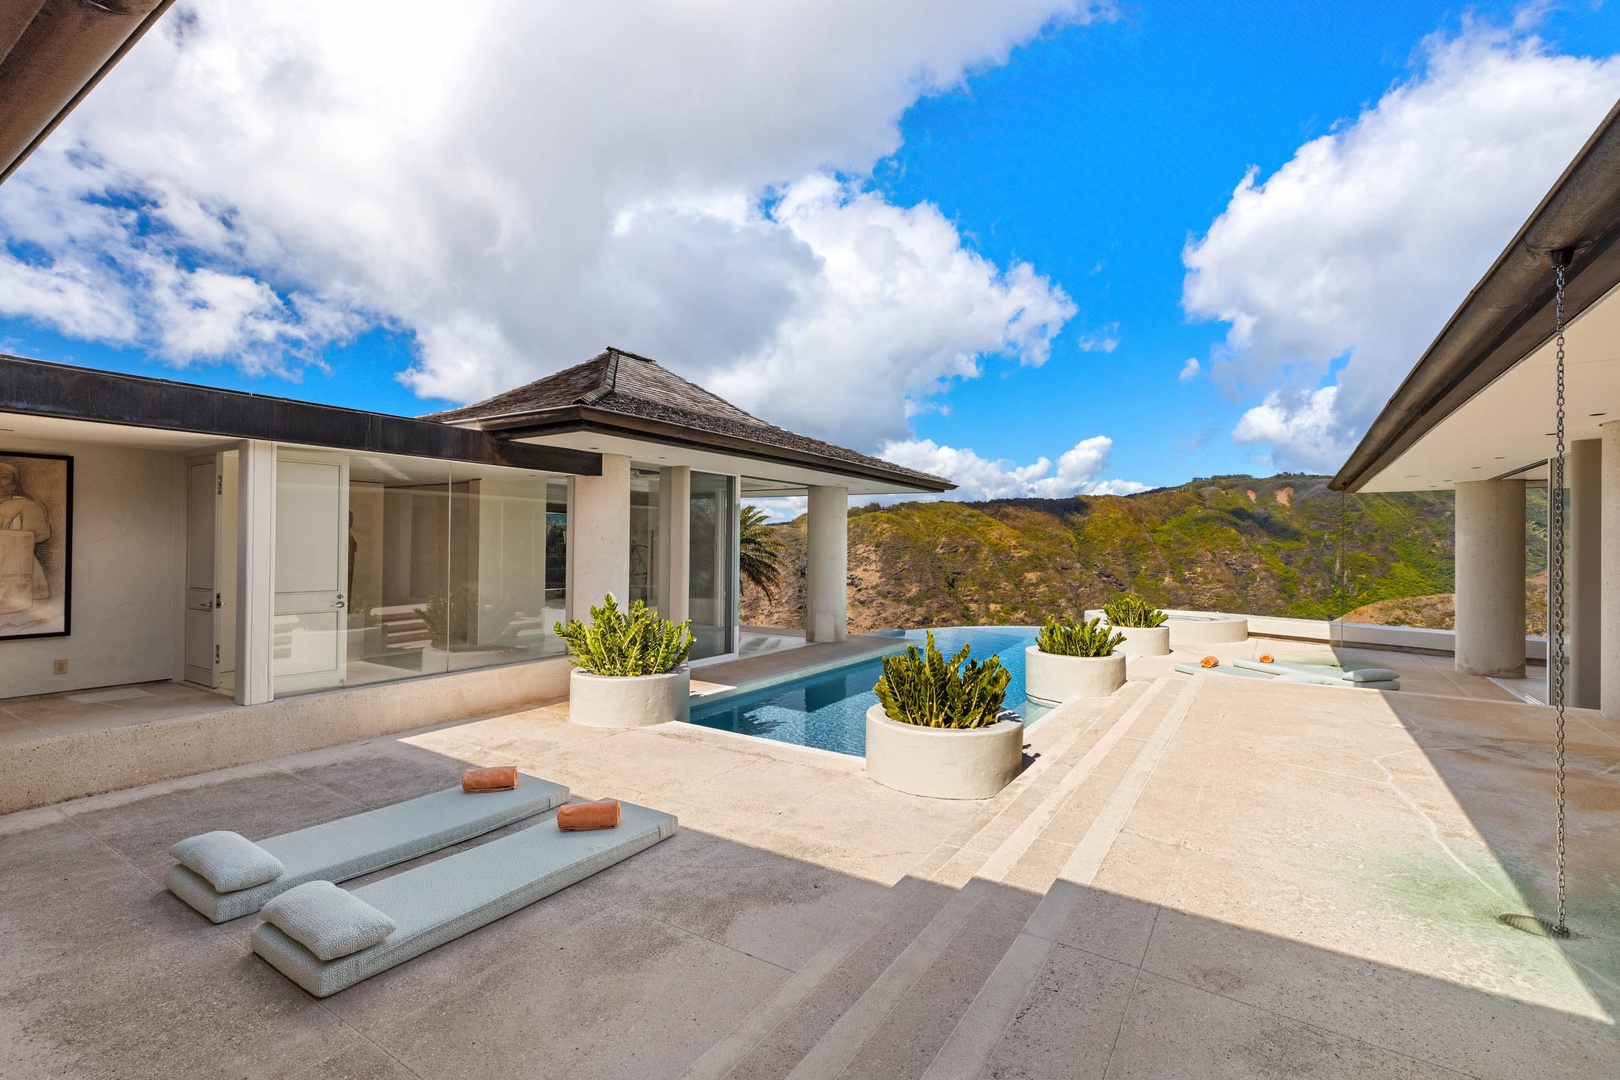 Honolulu Vacation Rentals, Sky Ridge House - A Hilltop Oasis with Panoramic Mountain Views.